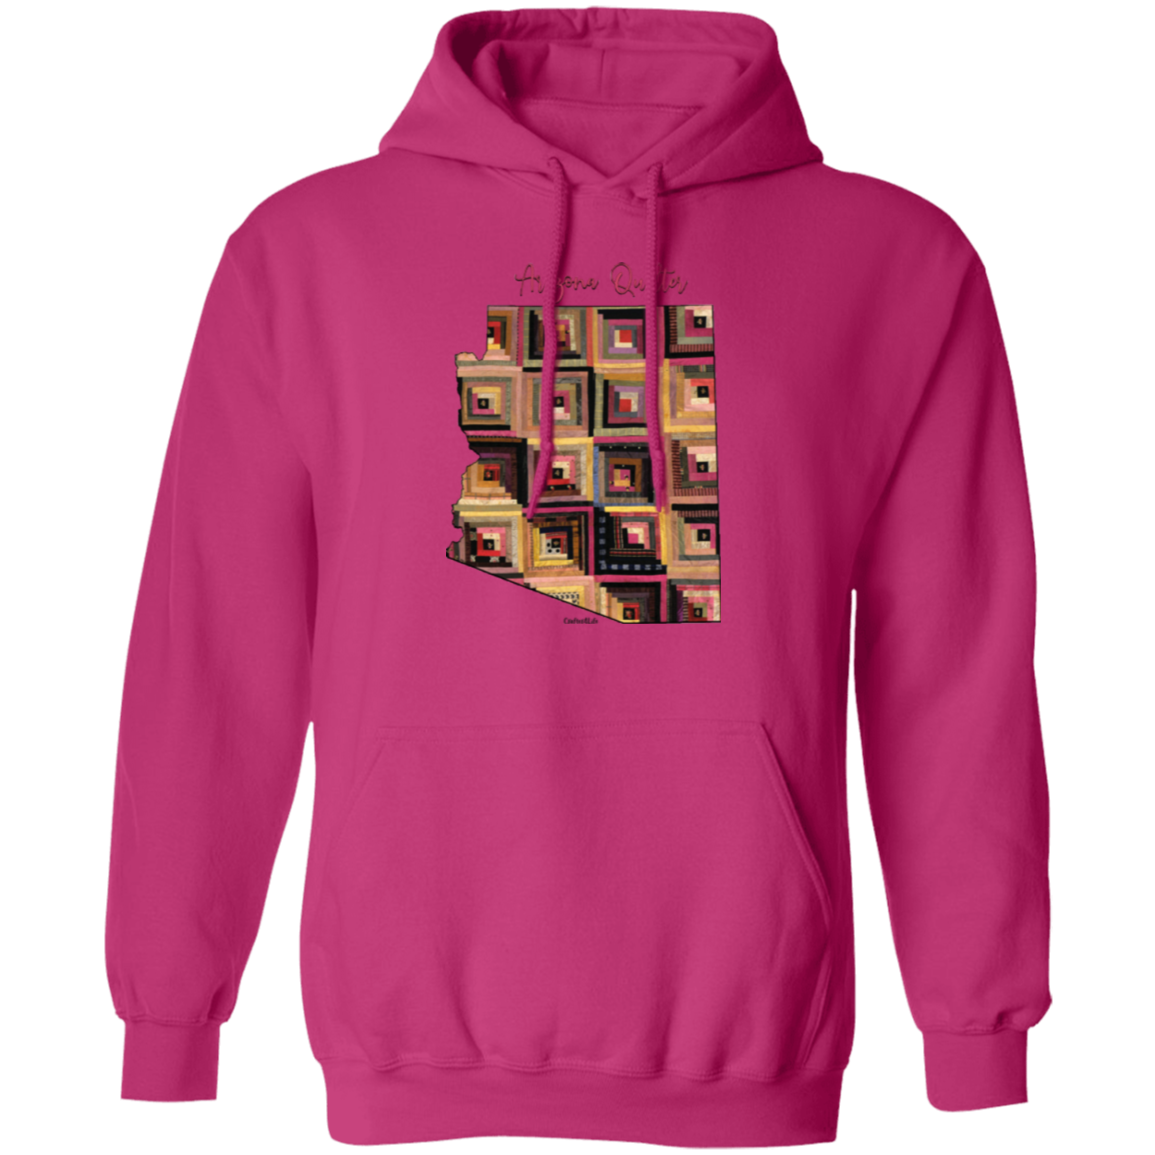 Arizona Quilter Pullover Hoodie, Gift for Quilting Friends and Family